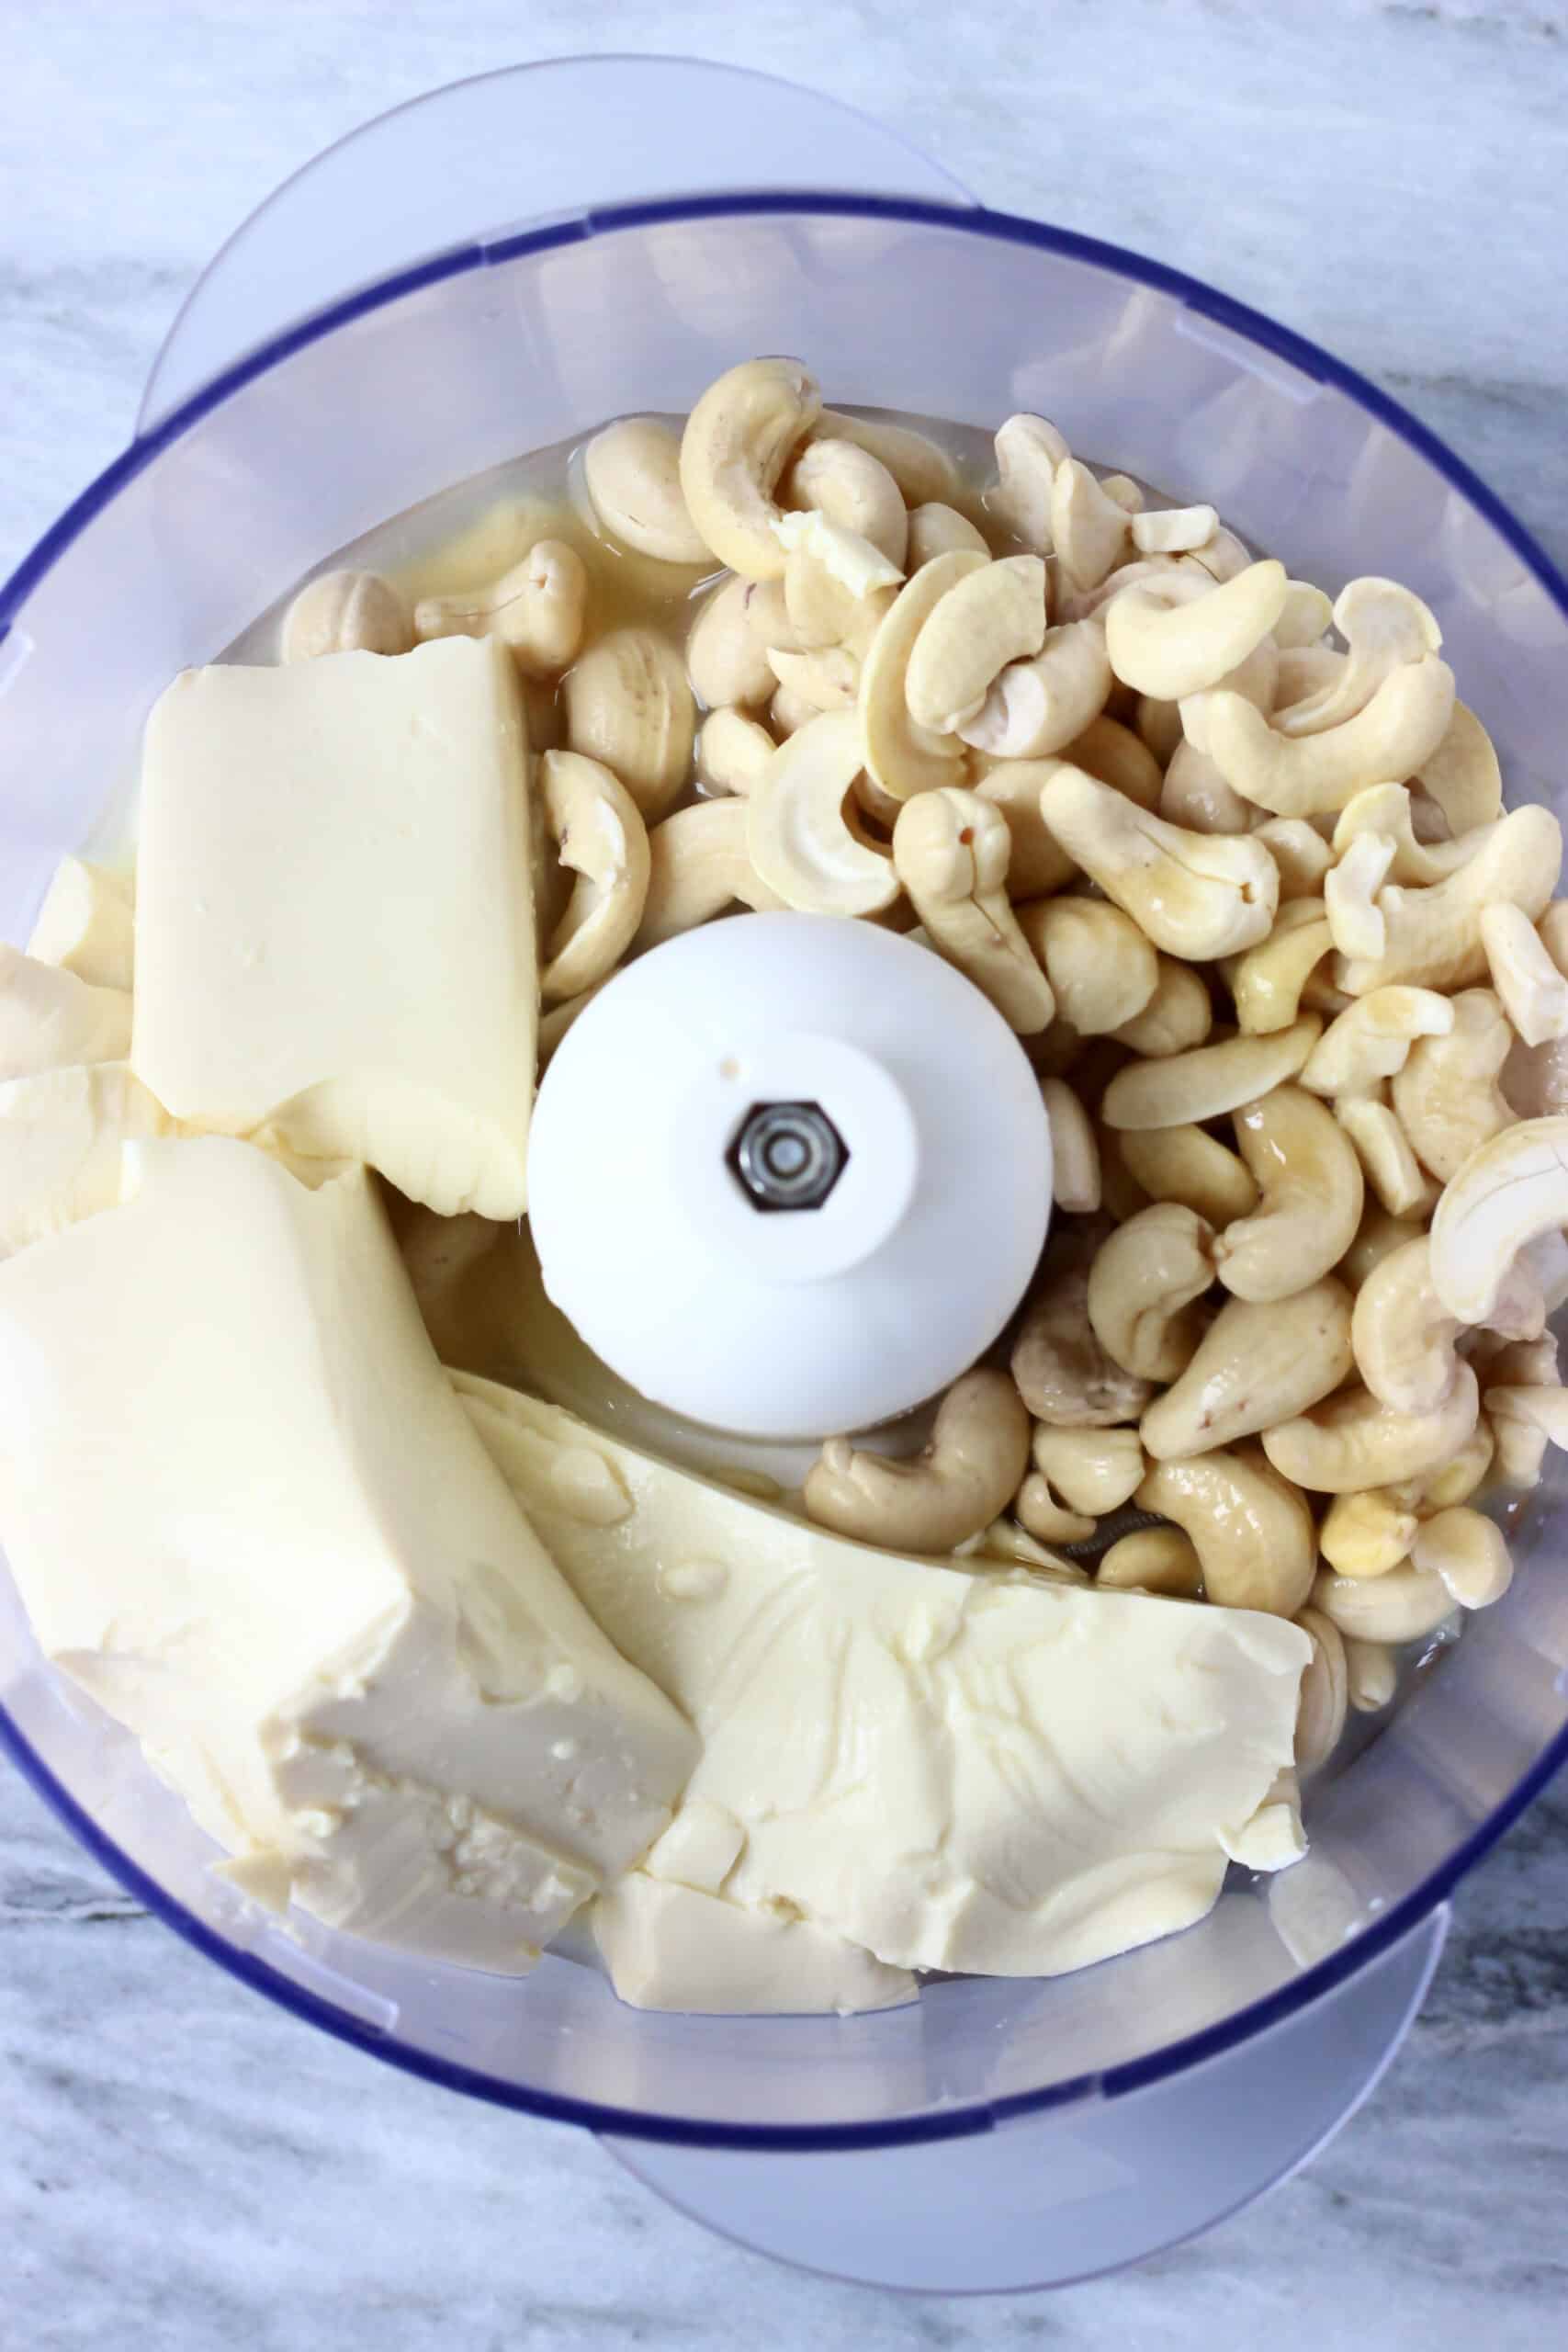 Silken tofu, cashew nuts, maple syrup and lemon juice in a food processor